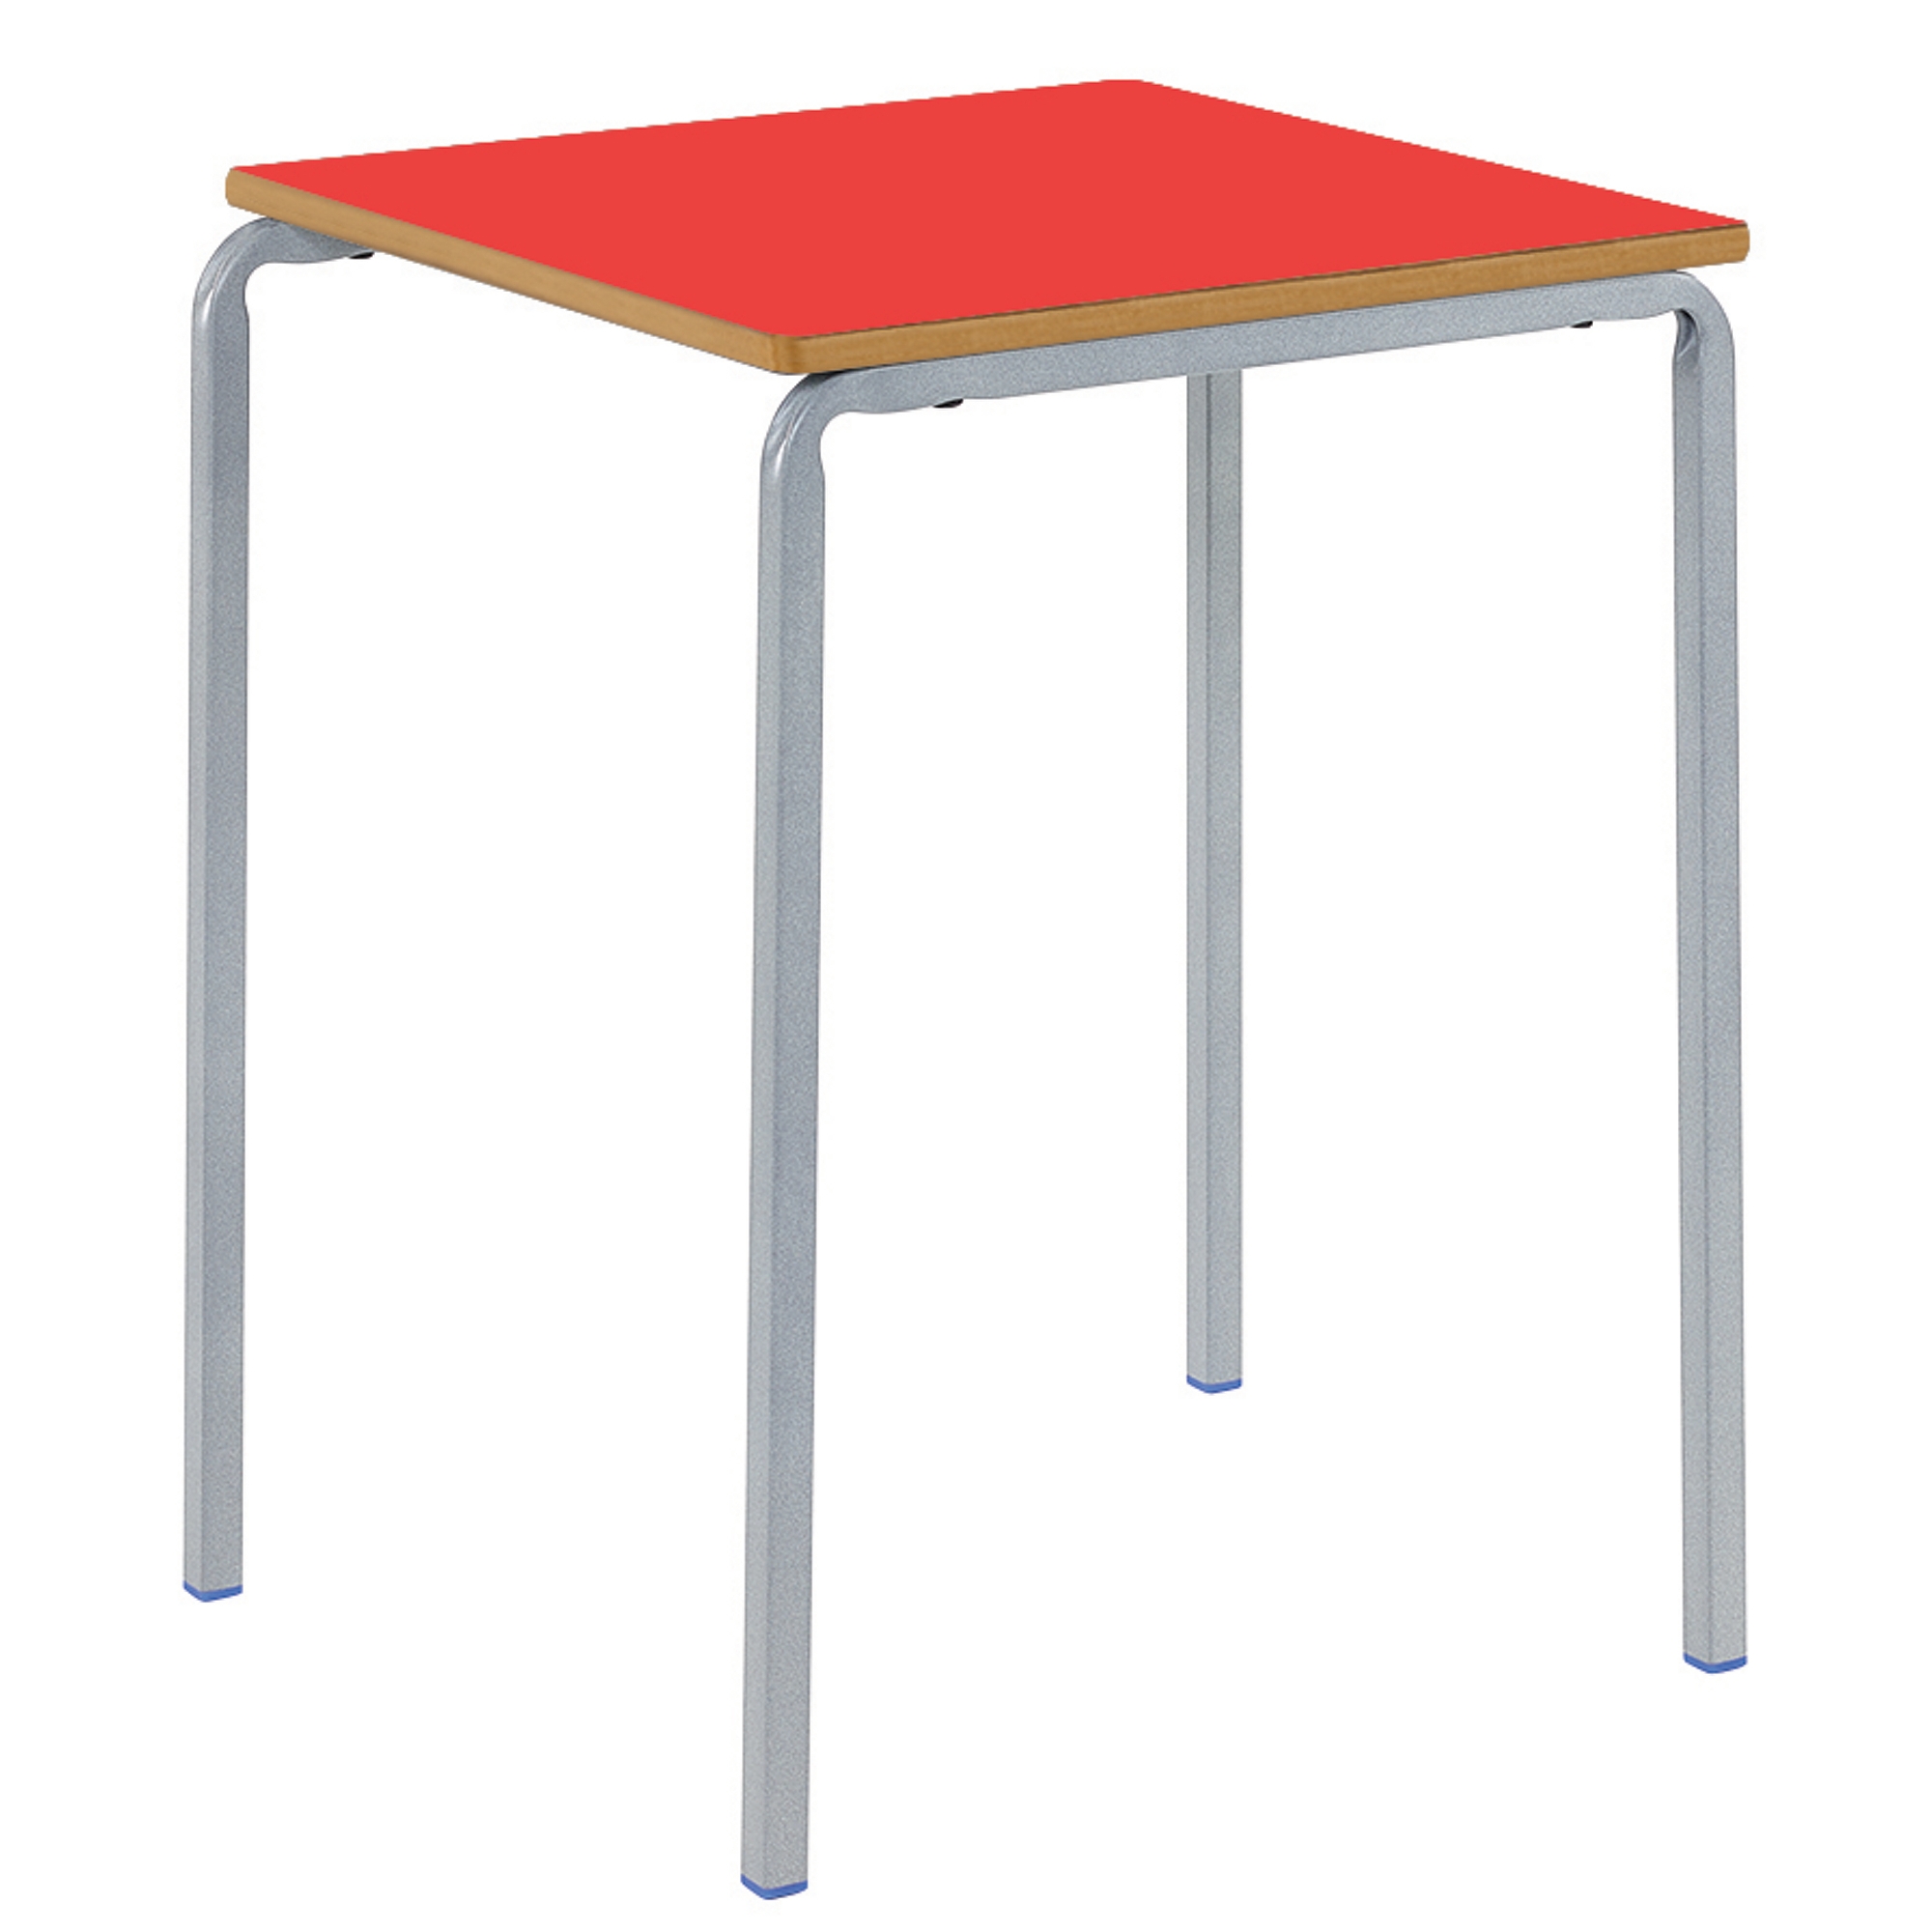 Classmates Square Crushed Bent Classroom Table - 600 x 600 x 530mm - Red